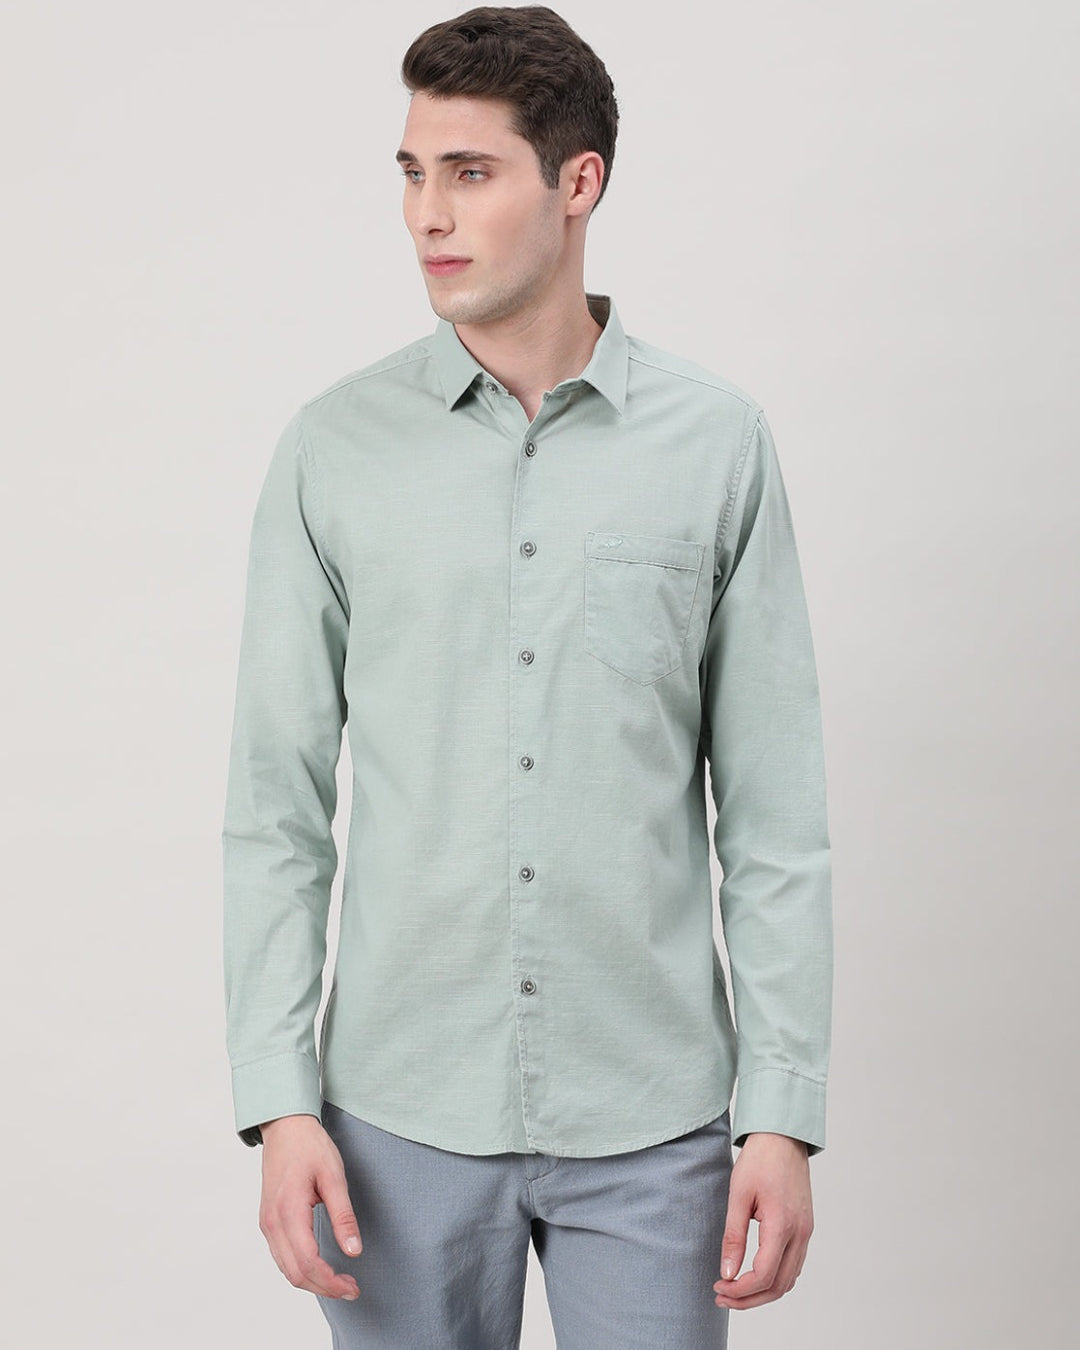 Casual Full Sleeve Comfort Fit Textured Plain Shirt Pale Aqua with Collar